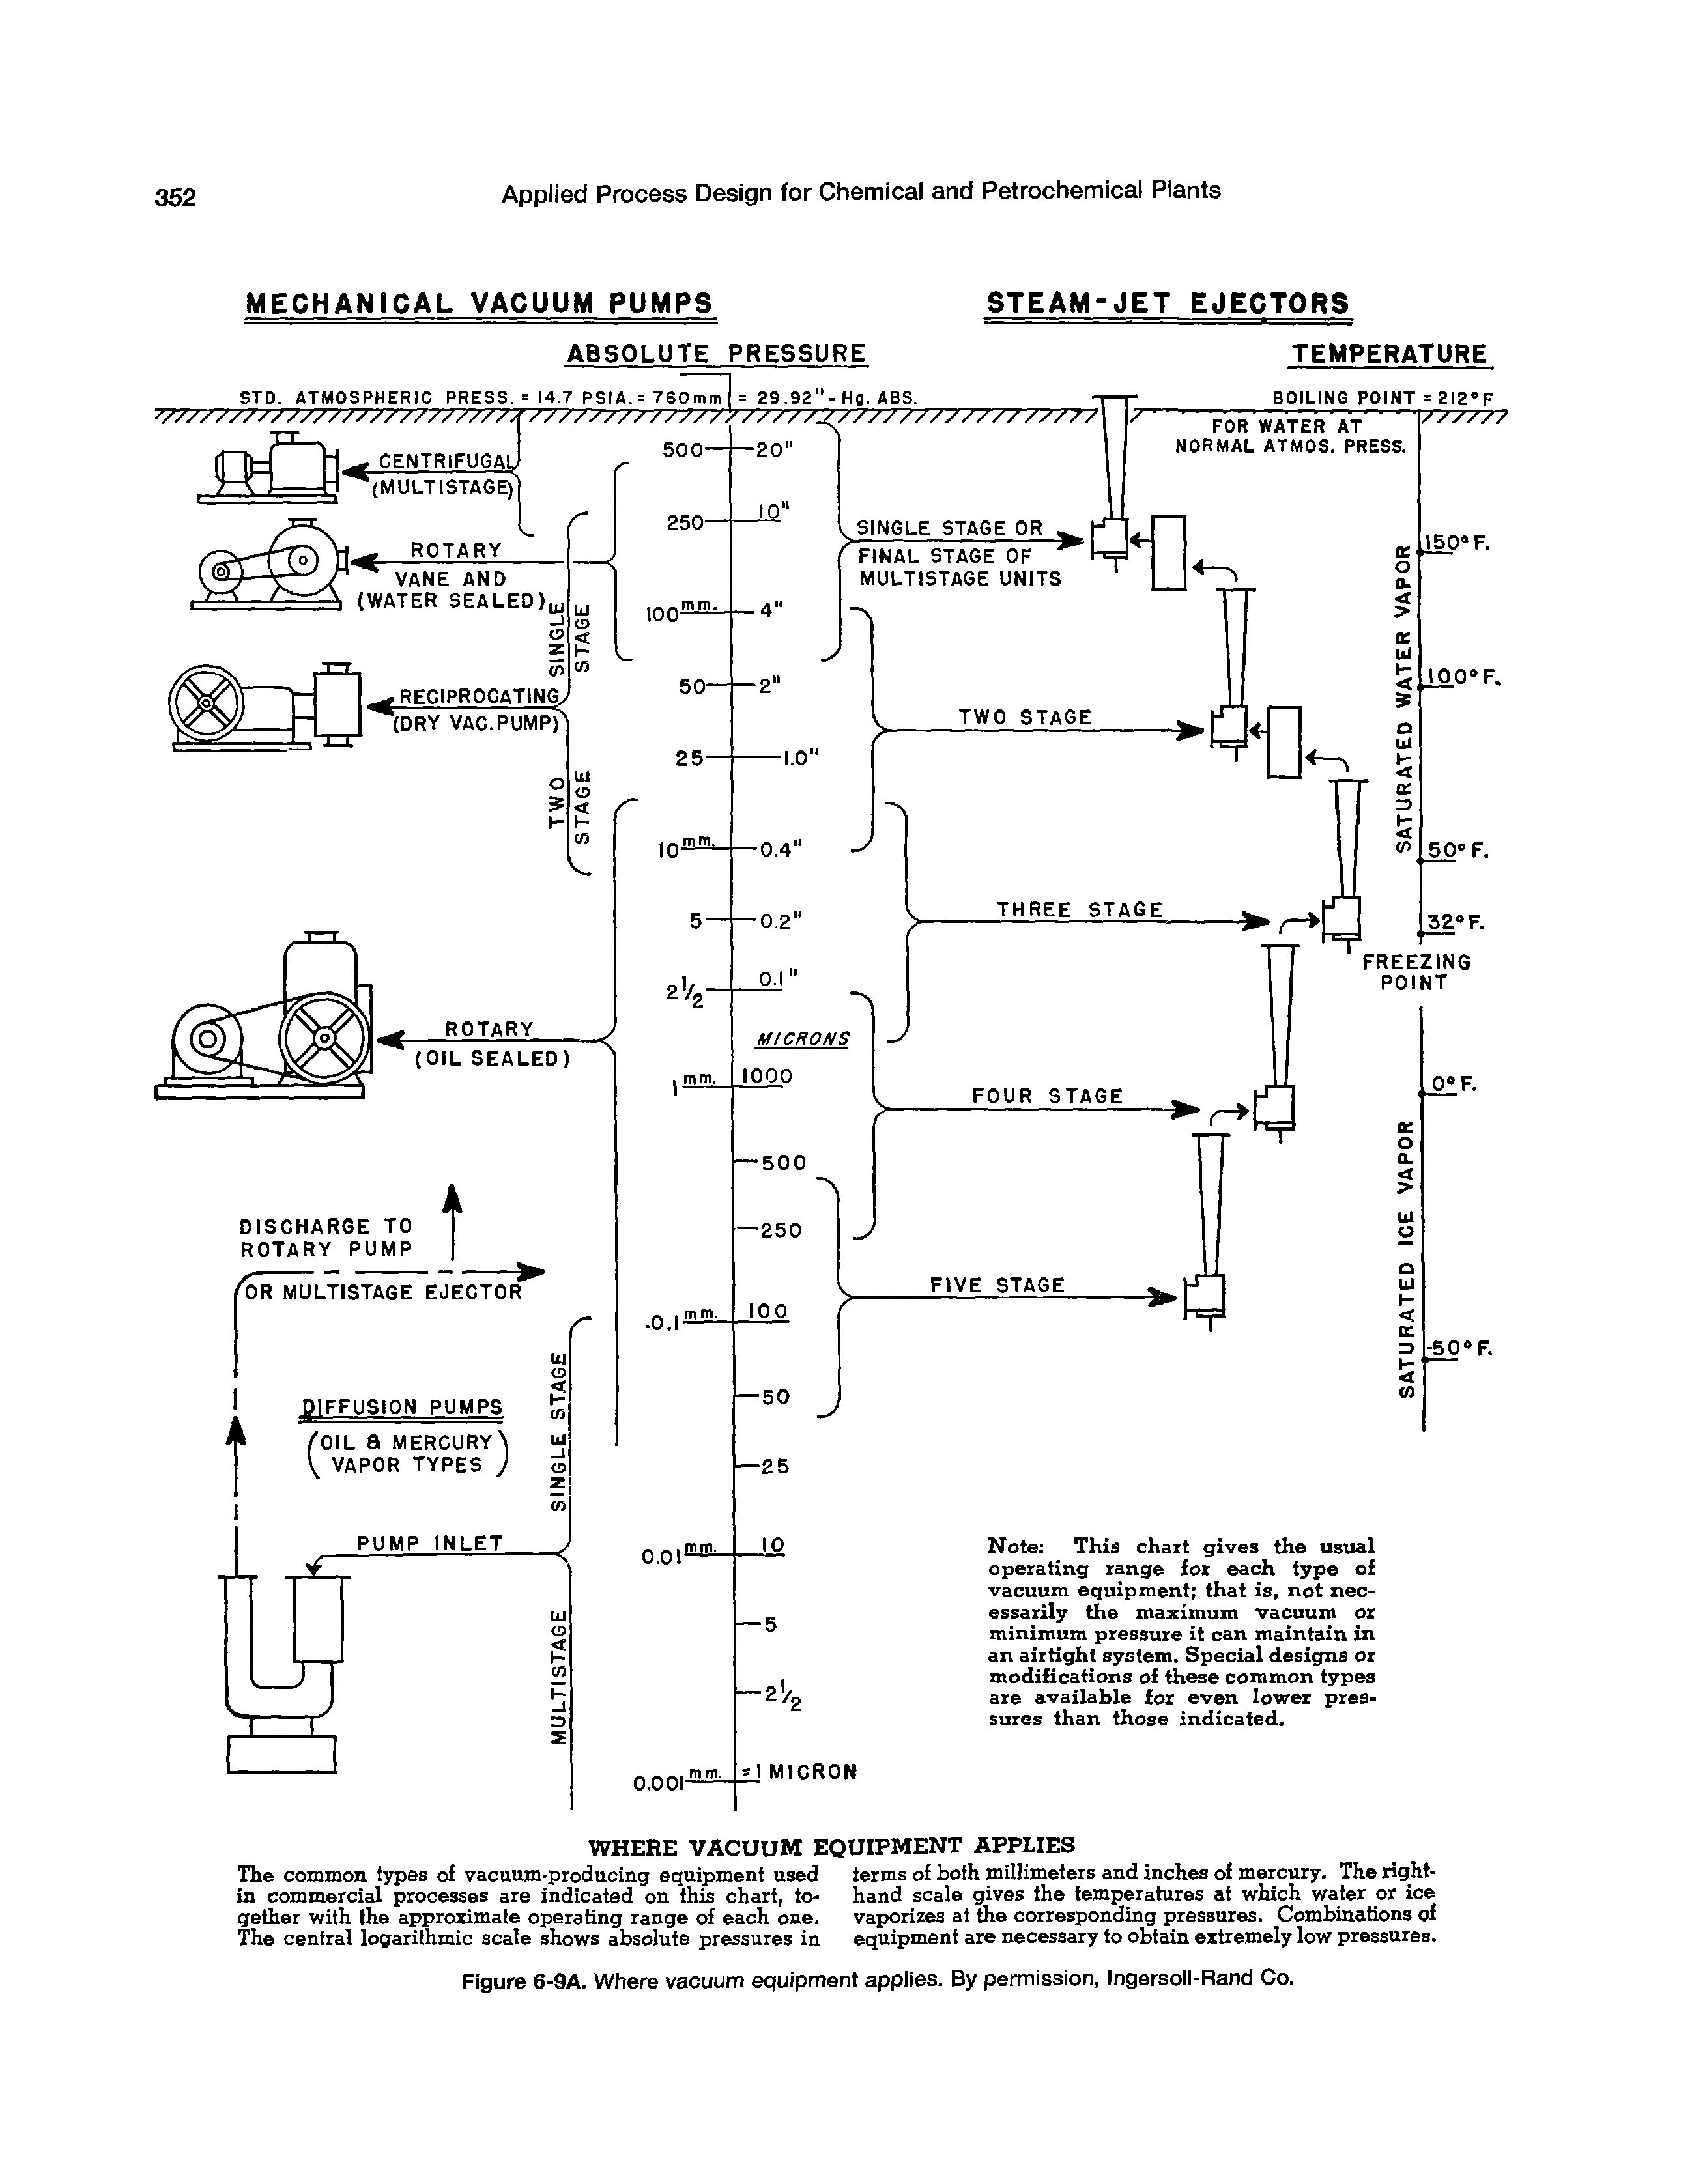 Figure 6-9A. Where vacuum equipment appiies. By permission, ingersoll-Rand Co.